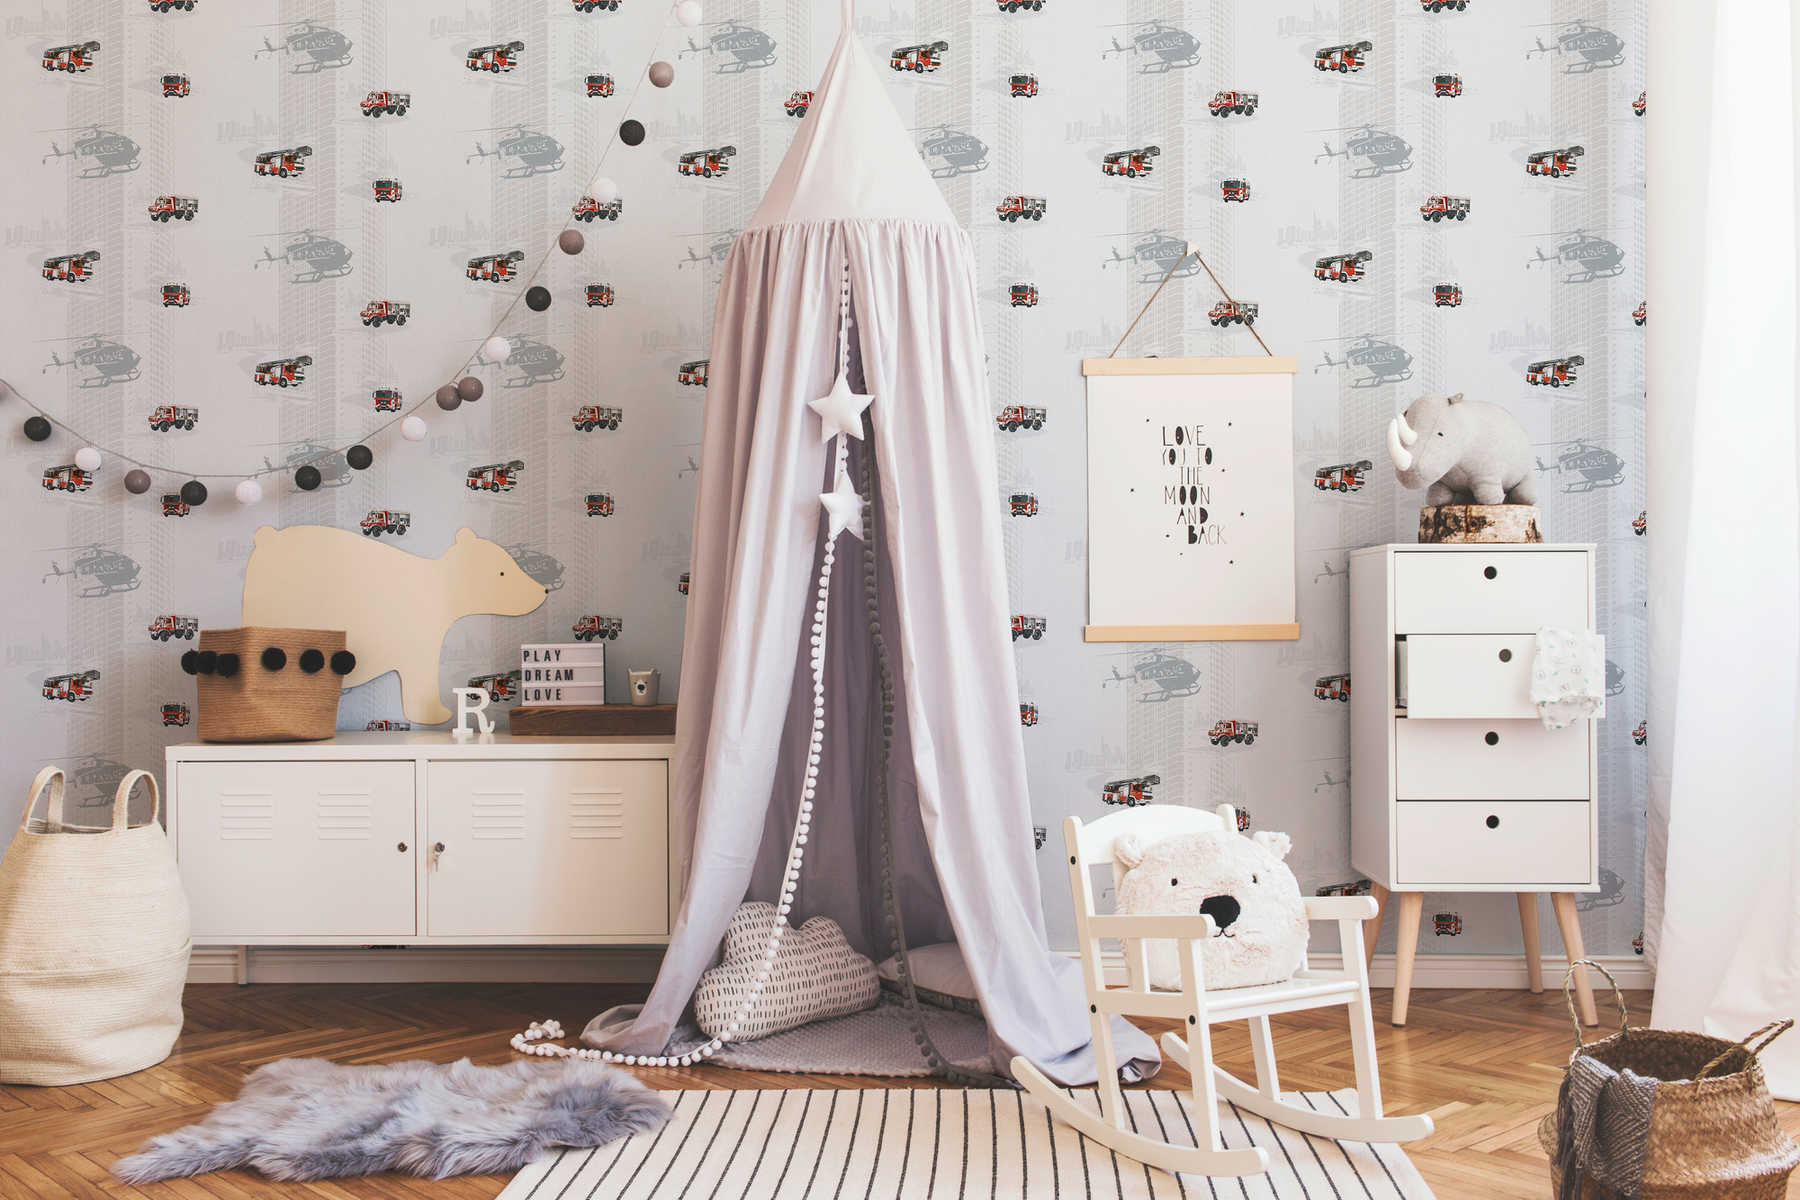             Nursery wallpaper fire department for boys - grey, red
        